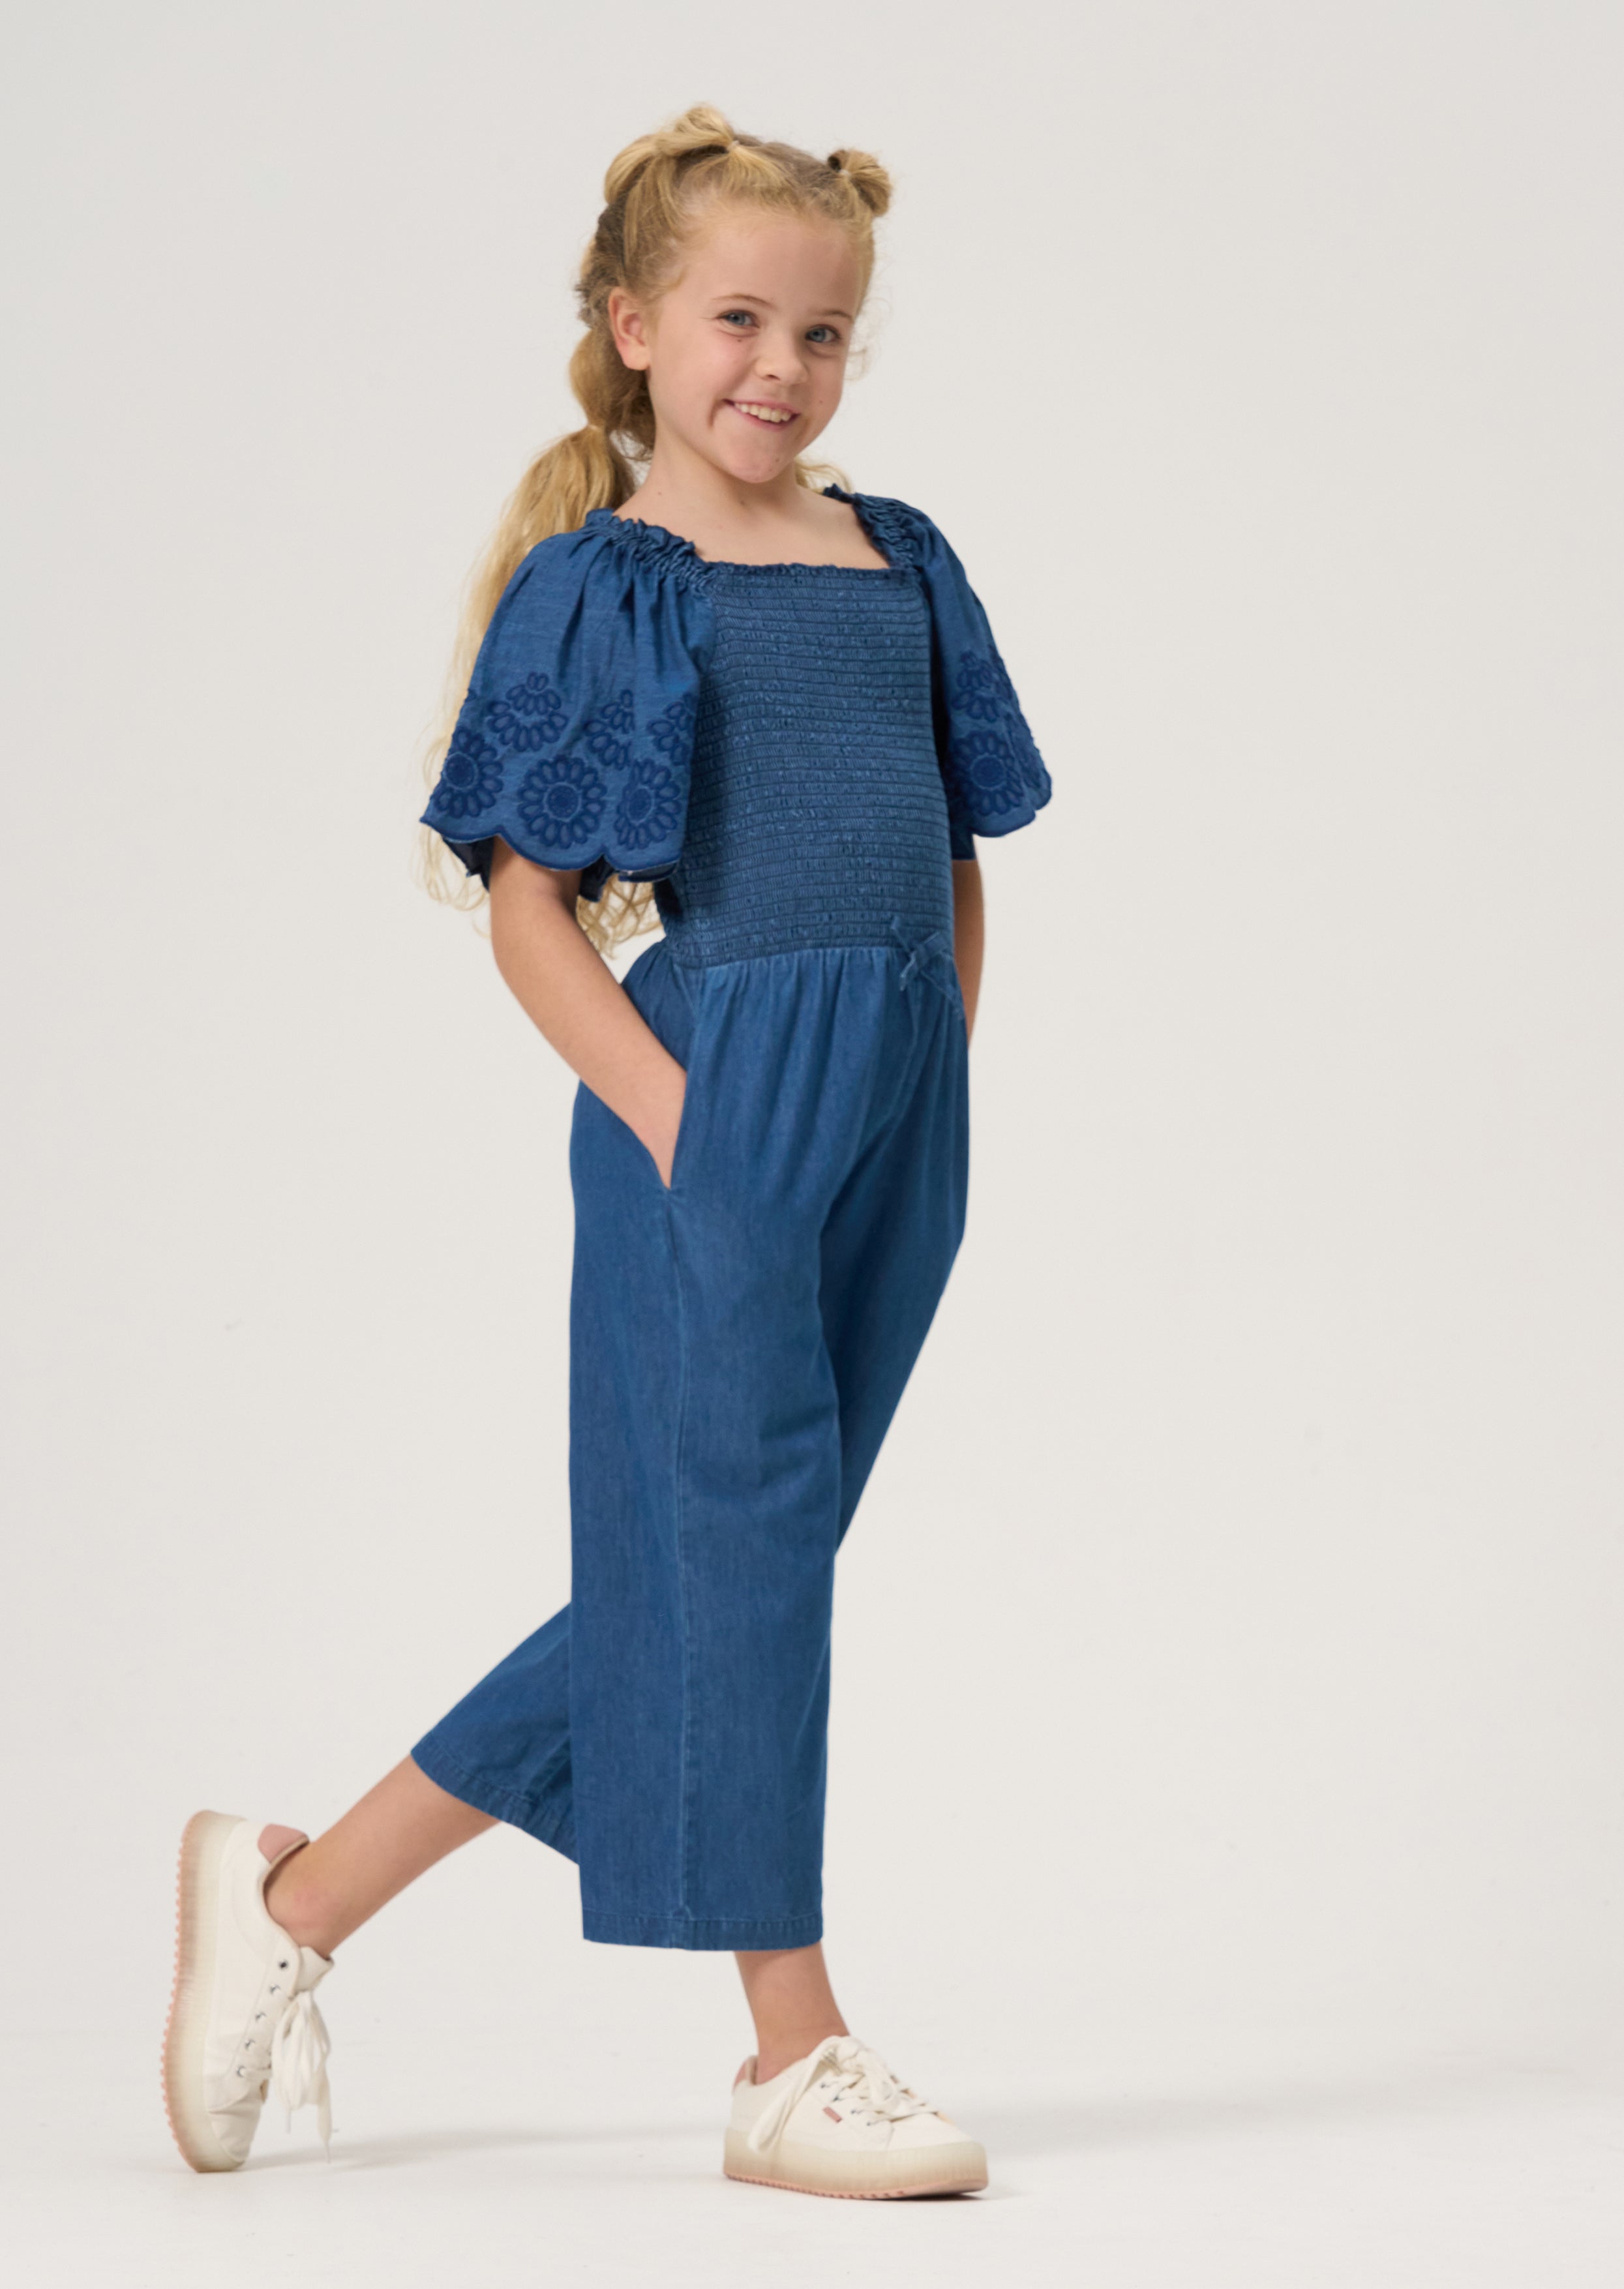 Girls Blue Denim Jumpsuit with Embroidered Sleeves